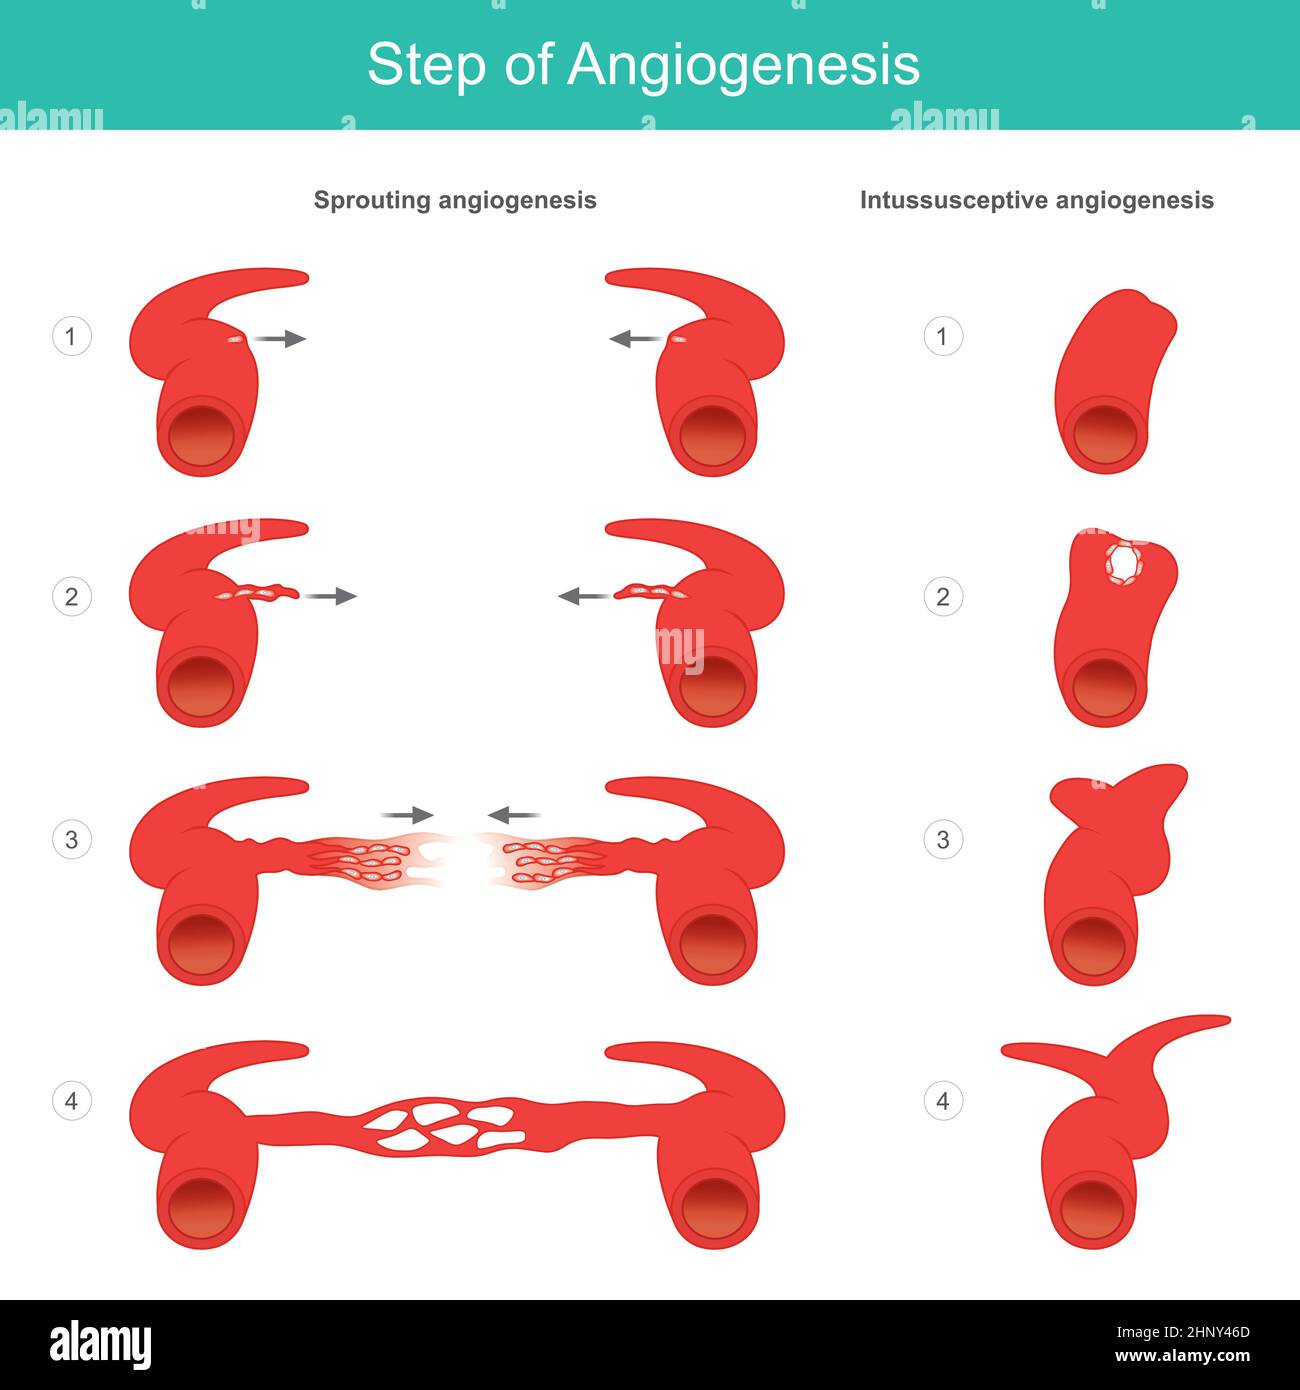 Step of Angiogenesis. Medical learning about the formation process of artery and capillary in human body. Illustration. Stock Vector